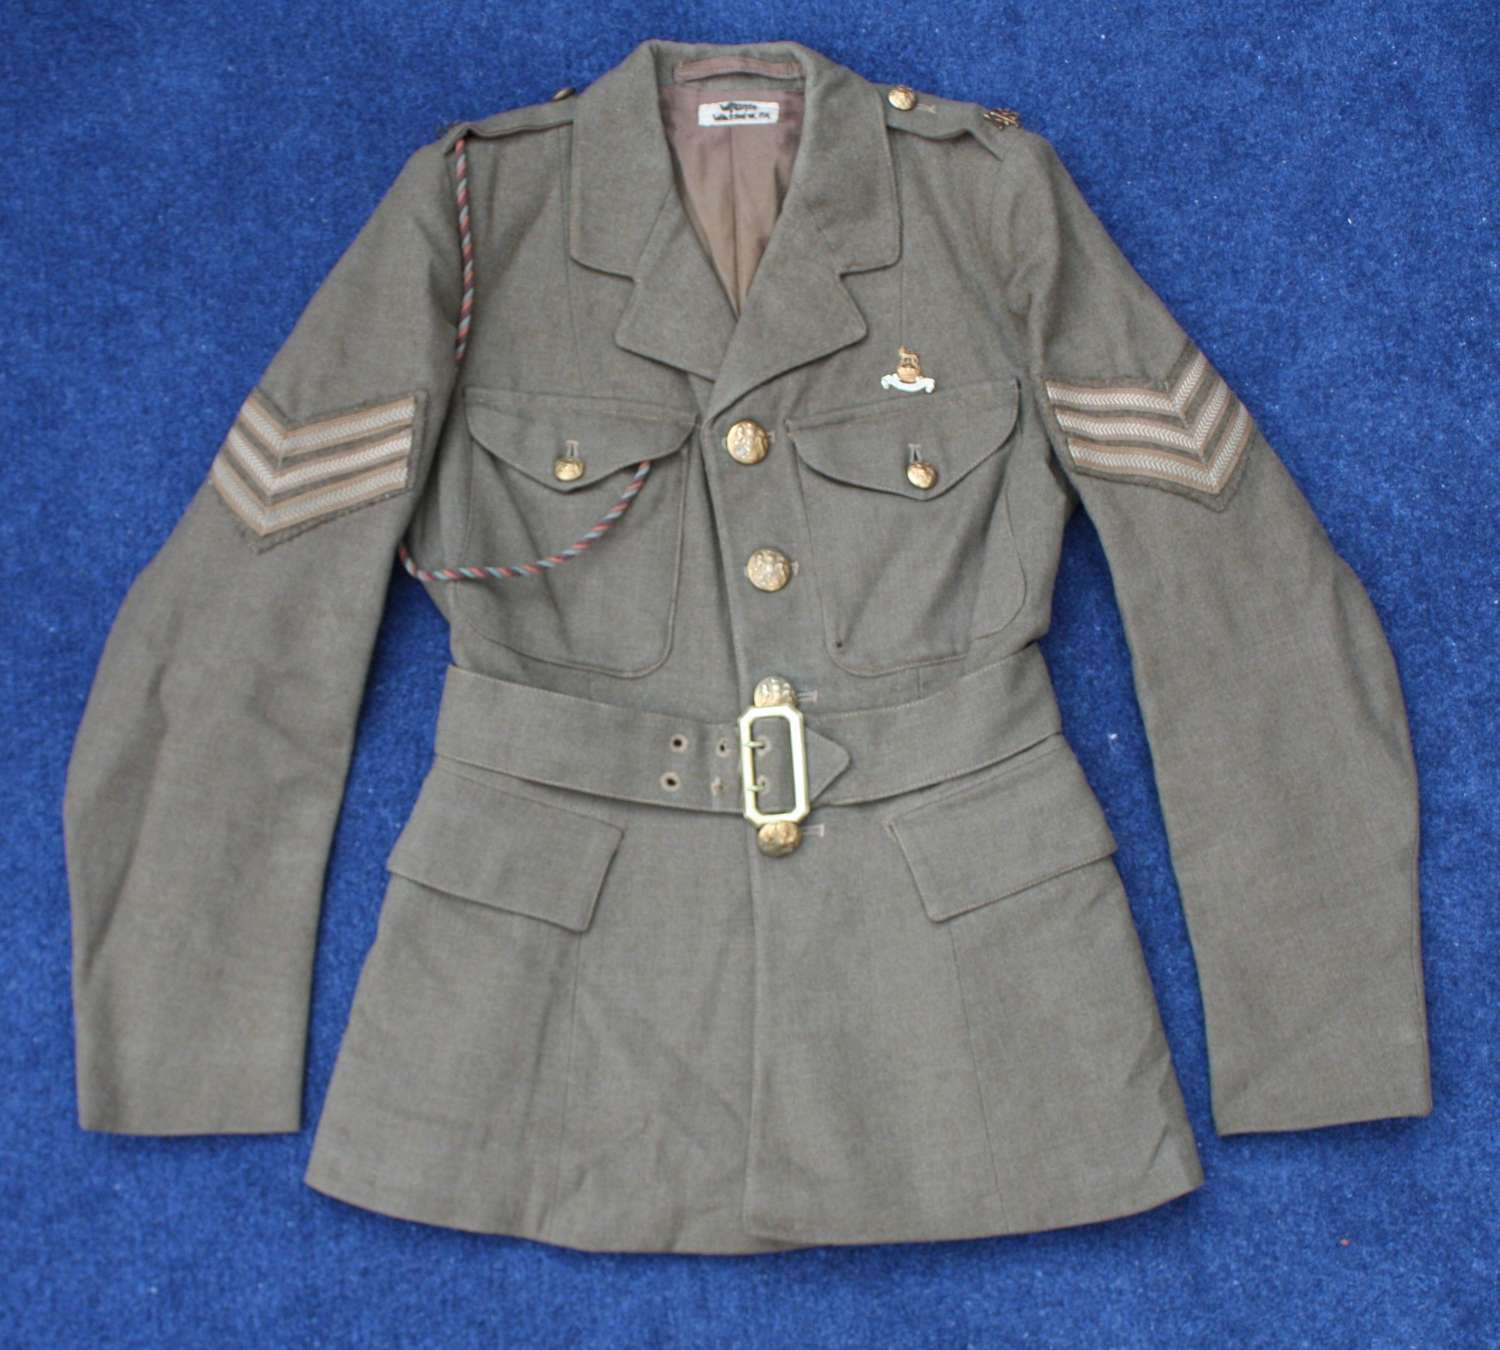 WW2 ATS WOMEN'S 'AUXILIARY TERRITORIAL SERVICE' 1943 DATED TUNIC